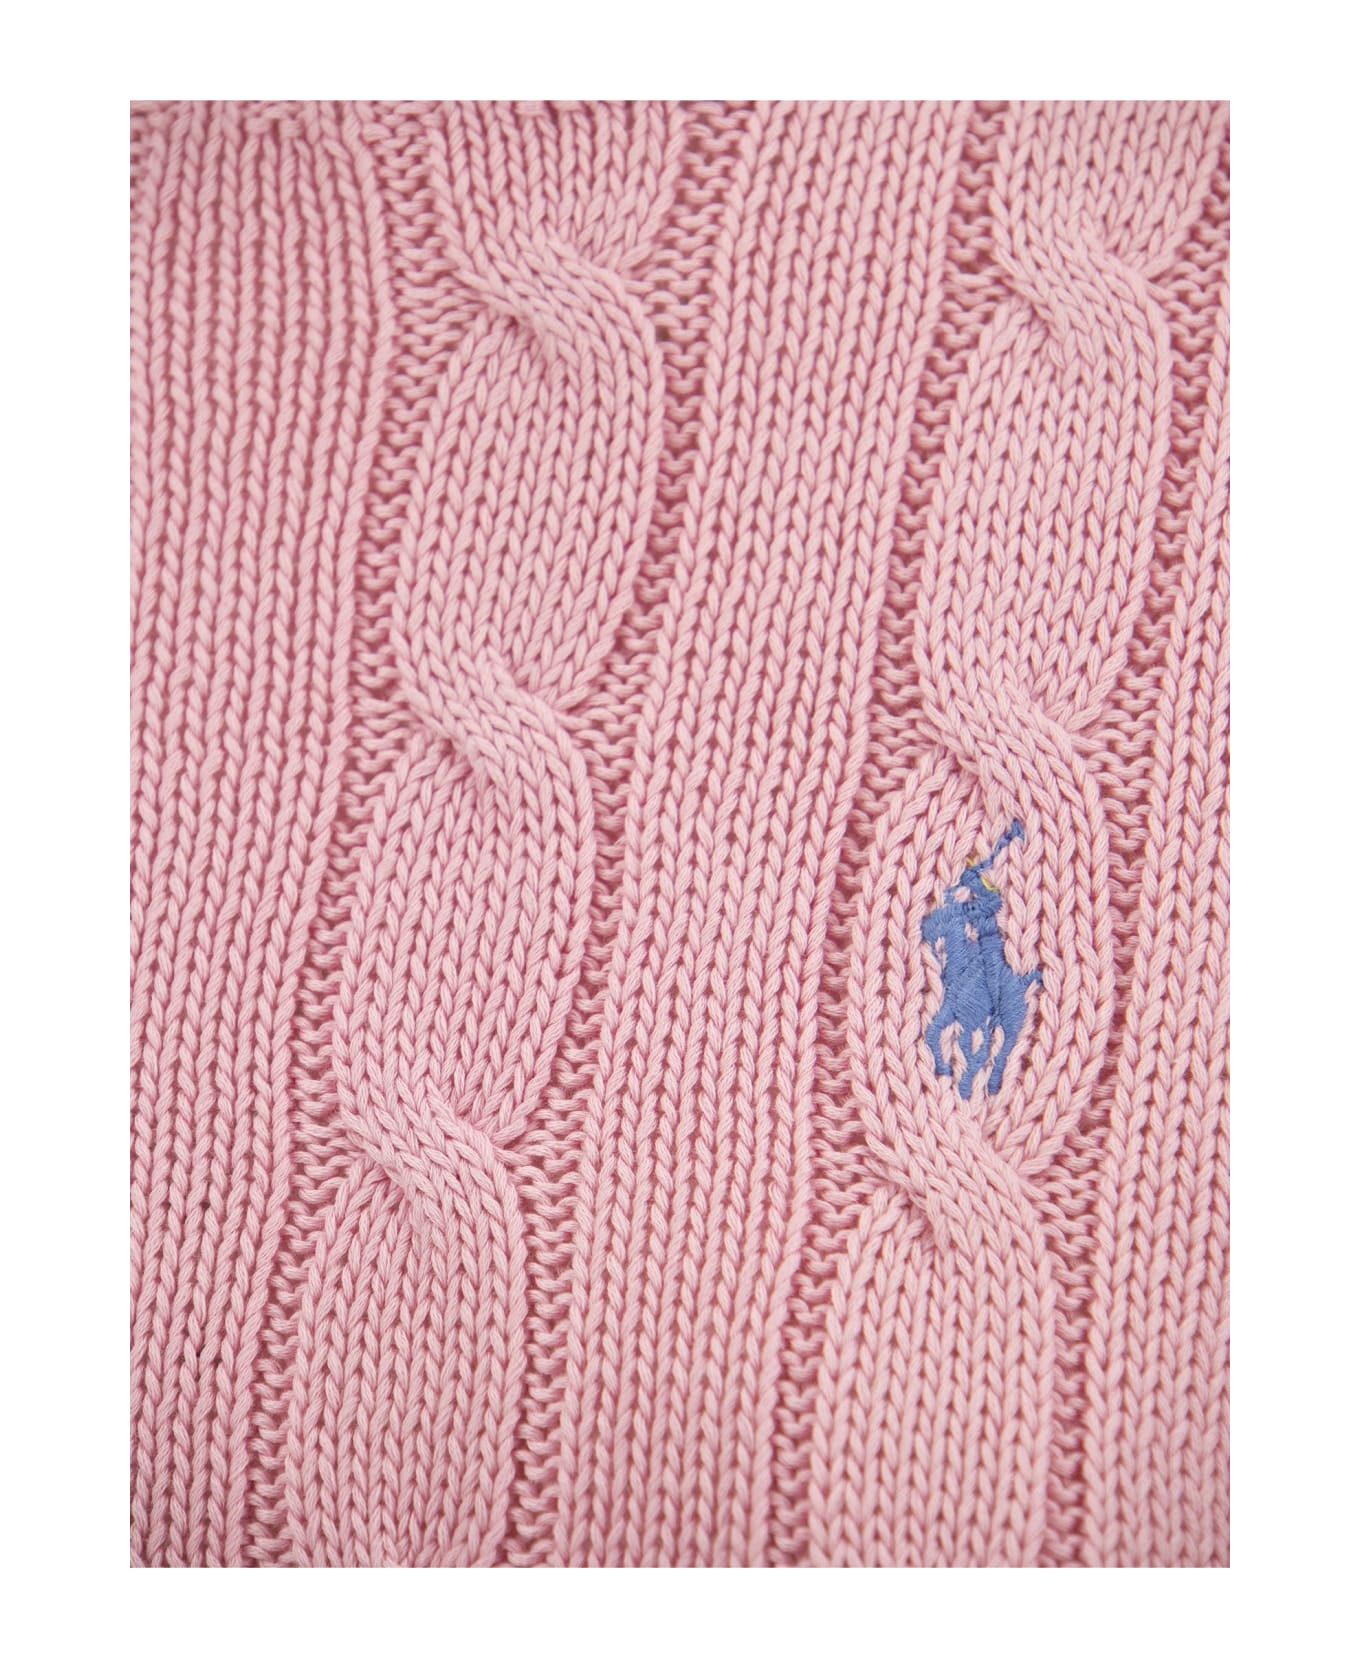 Polo Ralph Lauren Sweater With Pony - Pink